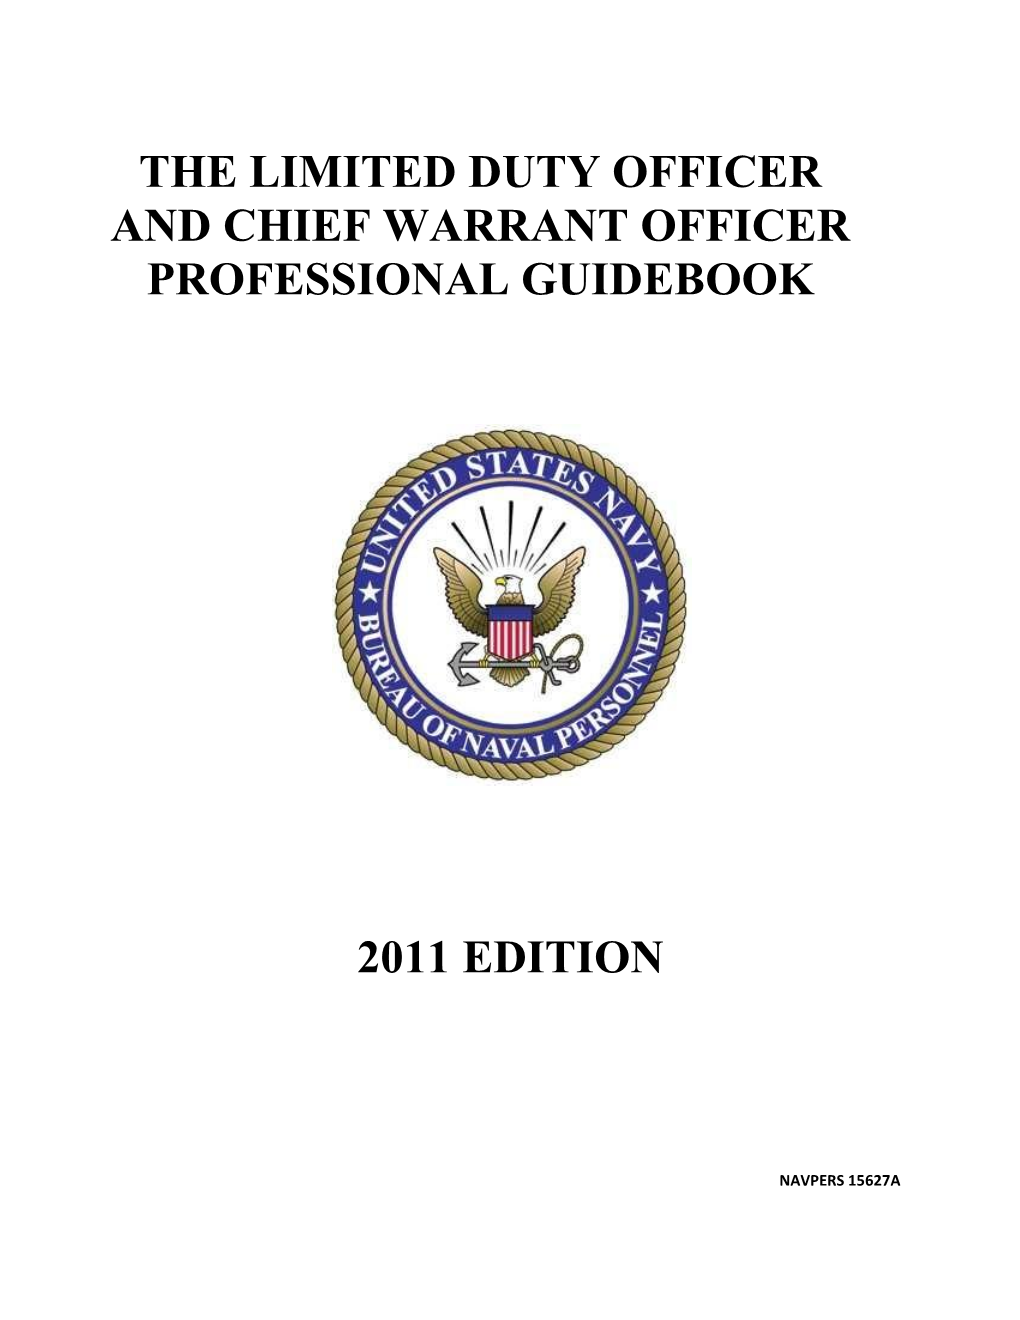 The Limited Duty Officer and Chief Warrant Officer Professional Guidebook